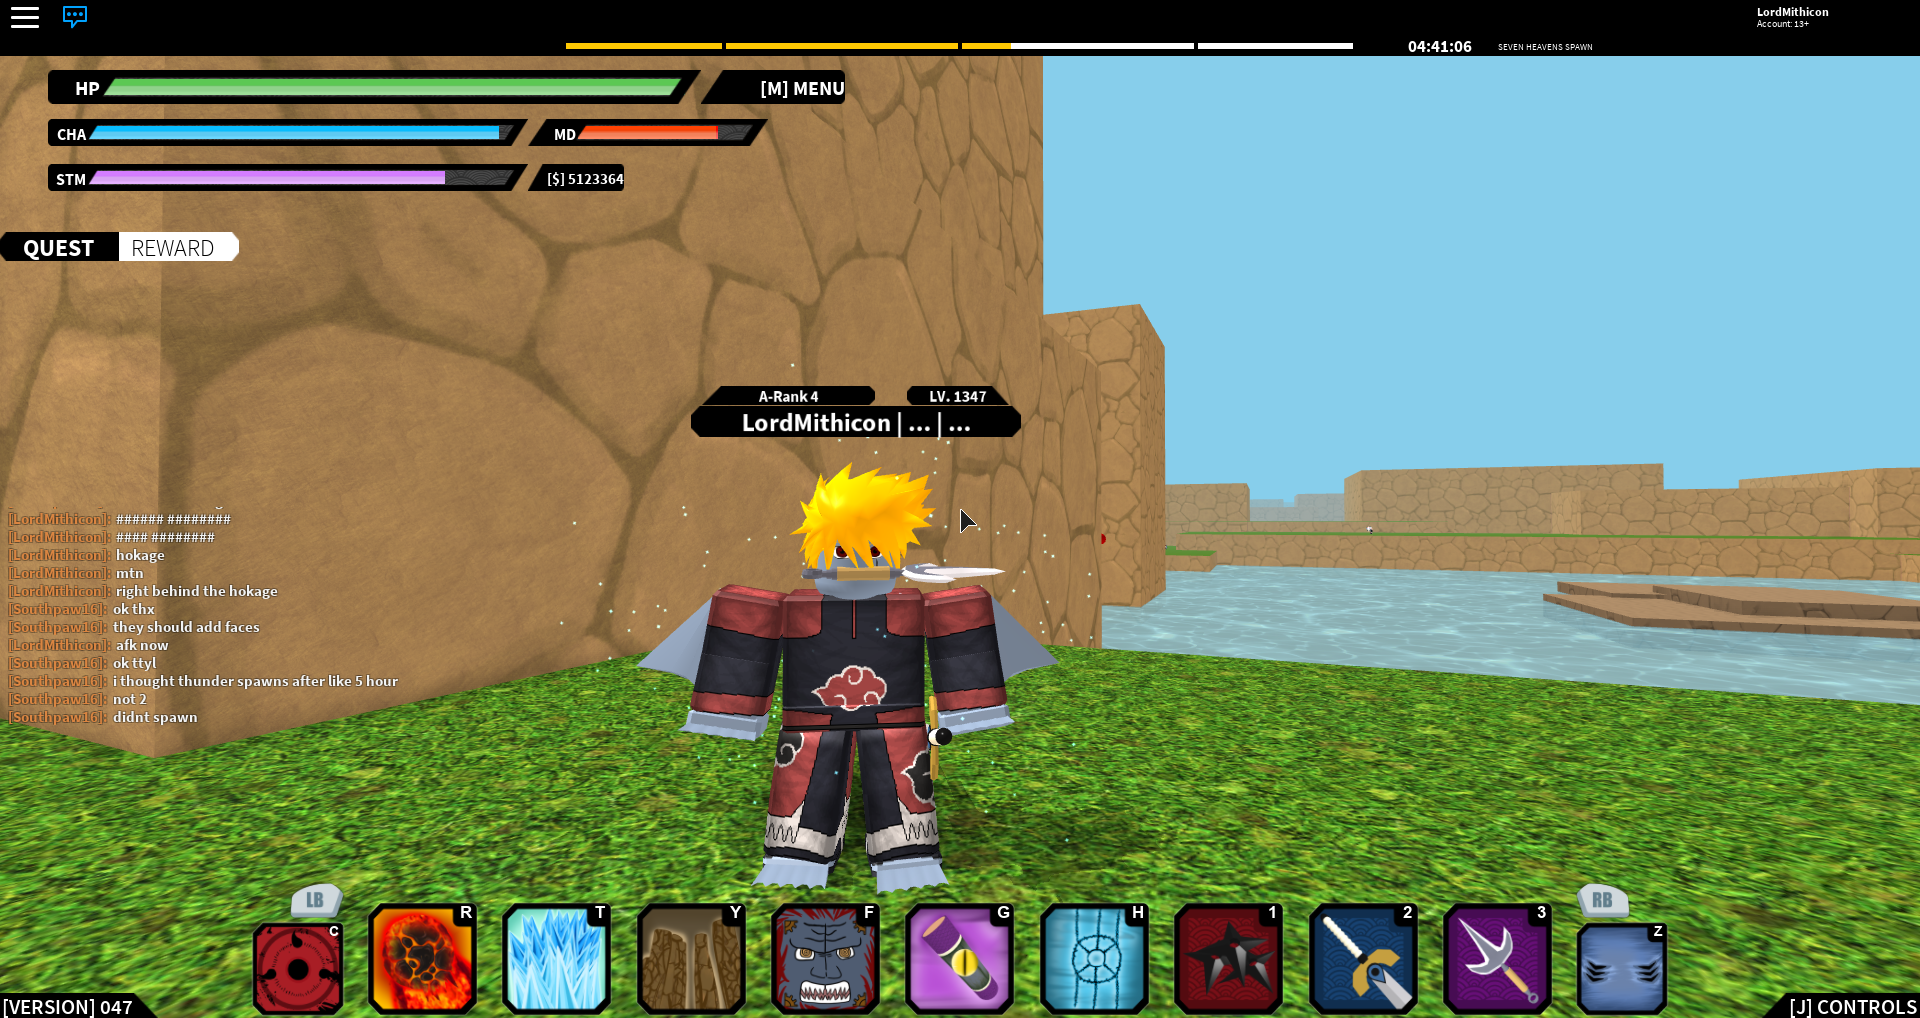 ALL *NEW* SECRET OP WORKING CODES! Roblox Naruto RPG: Beyond 